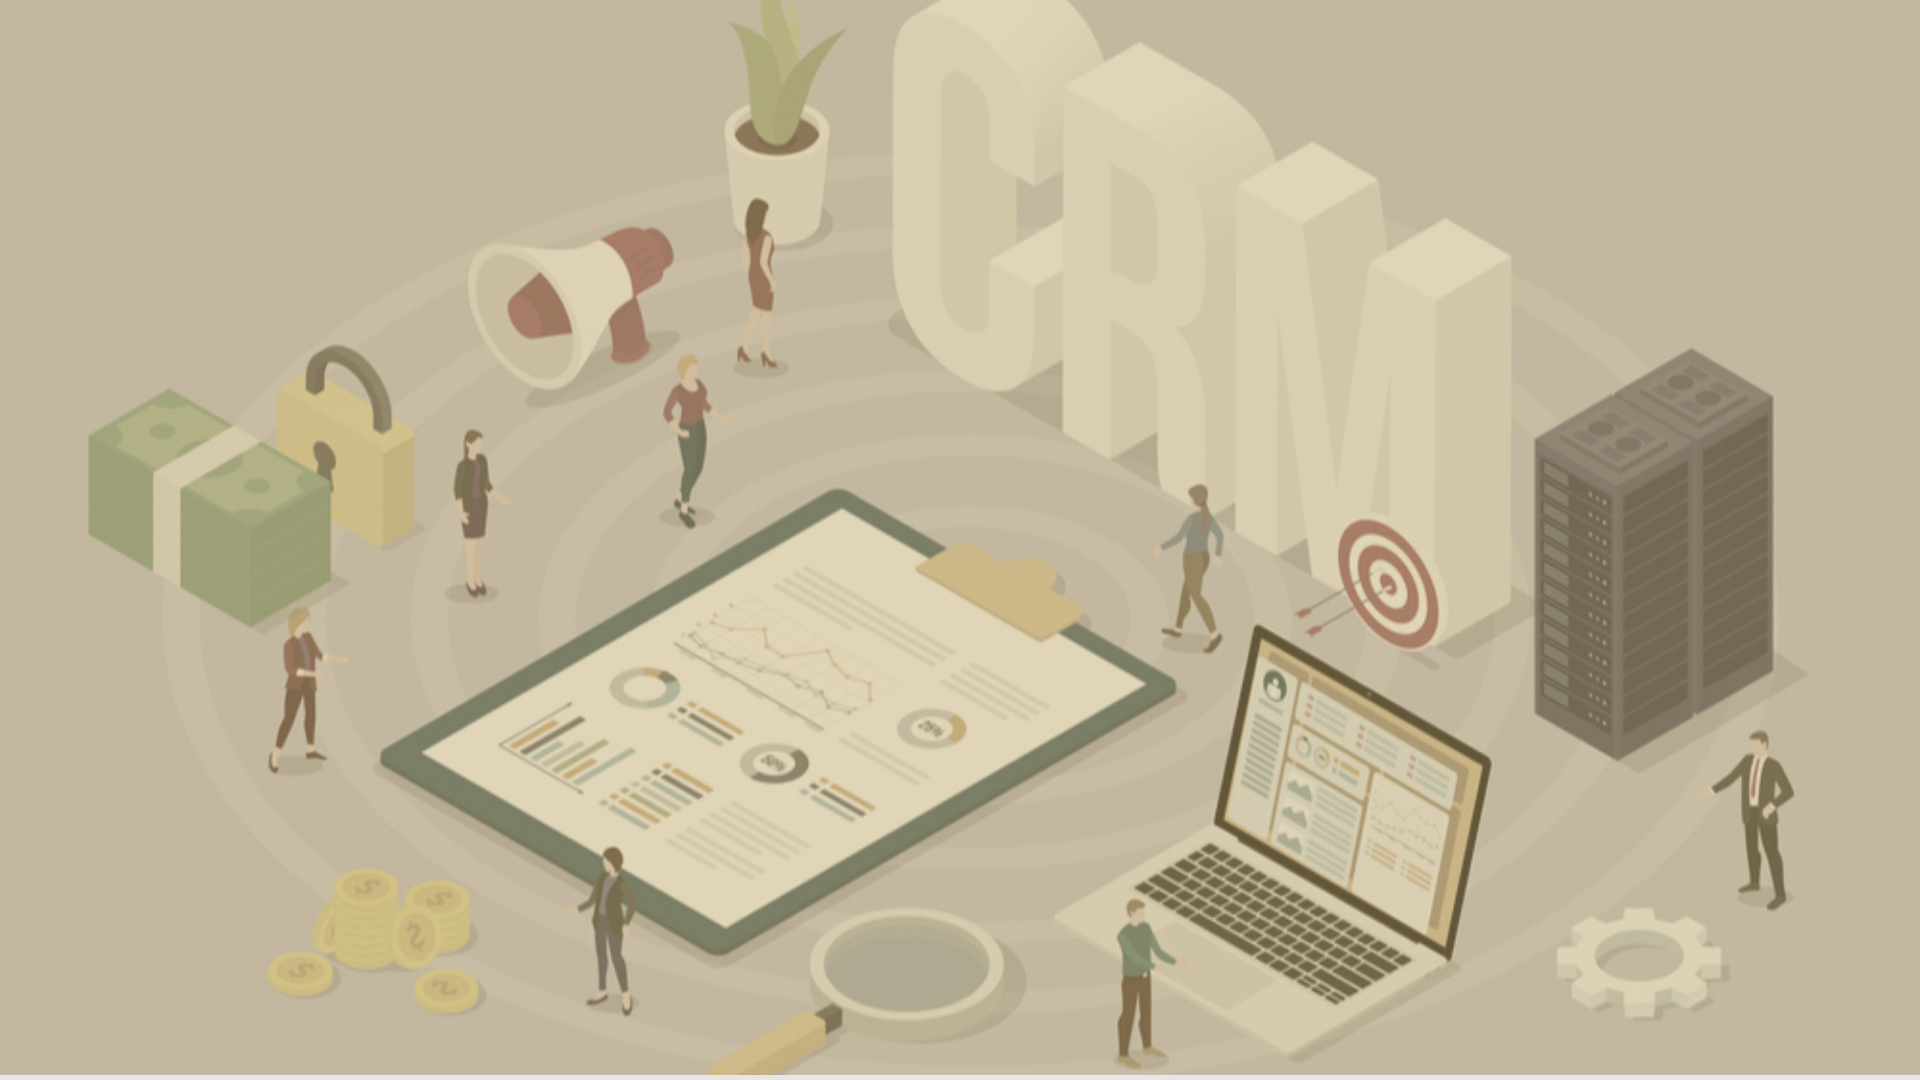 Article | CRM: A Challenging Subject